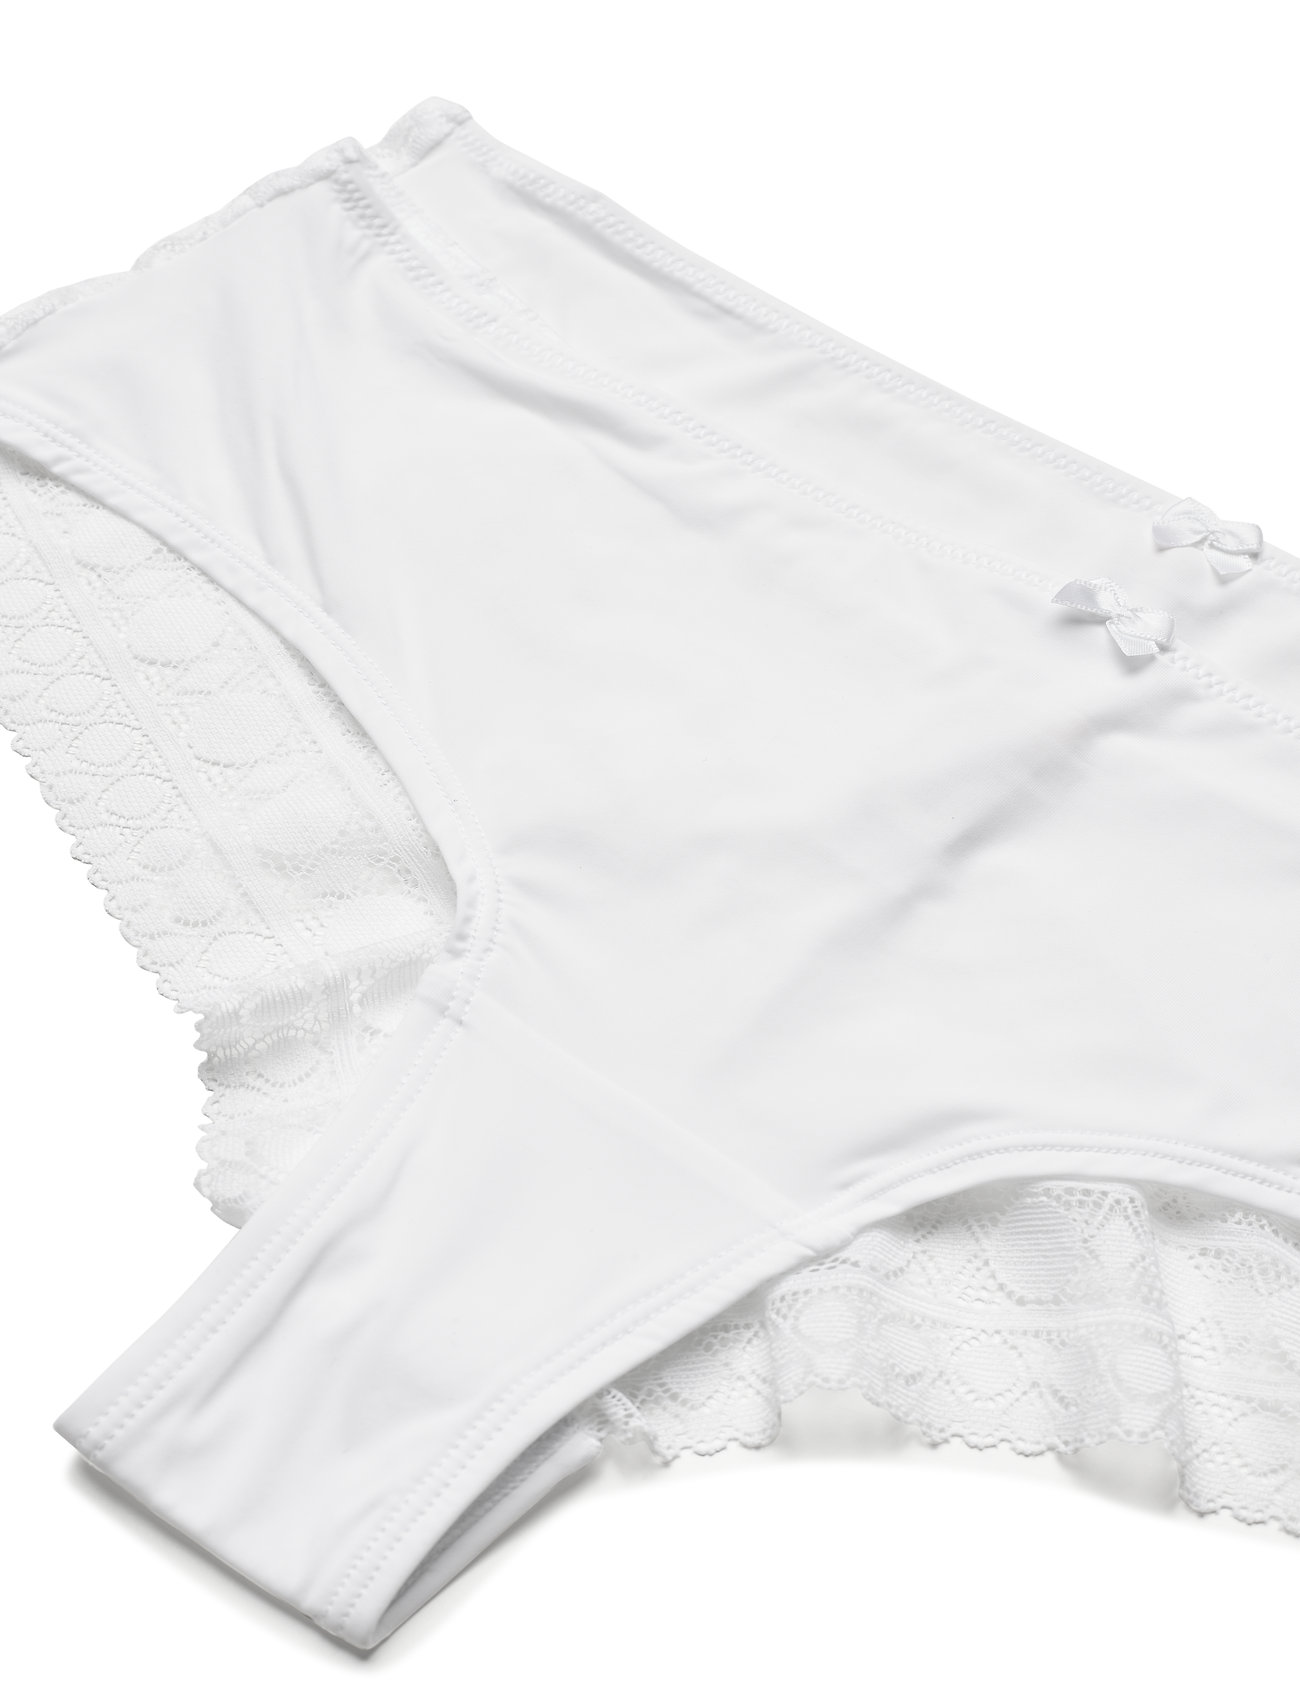 Esprit Bodywear Women - Double pack: Brazilian hipster shorts trimmed with lace - mažiausios kainos - white - 1